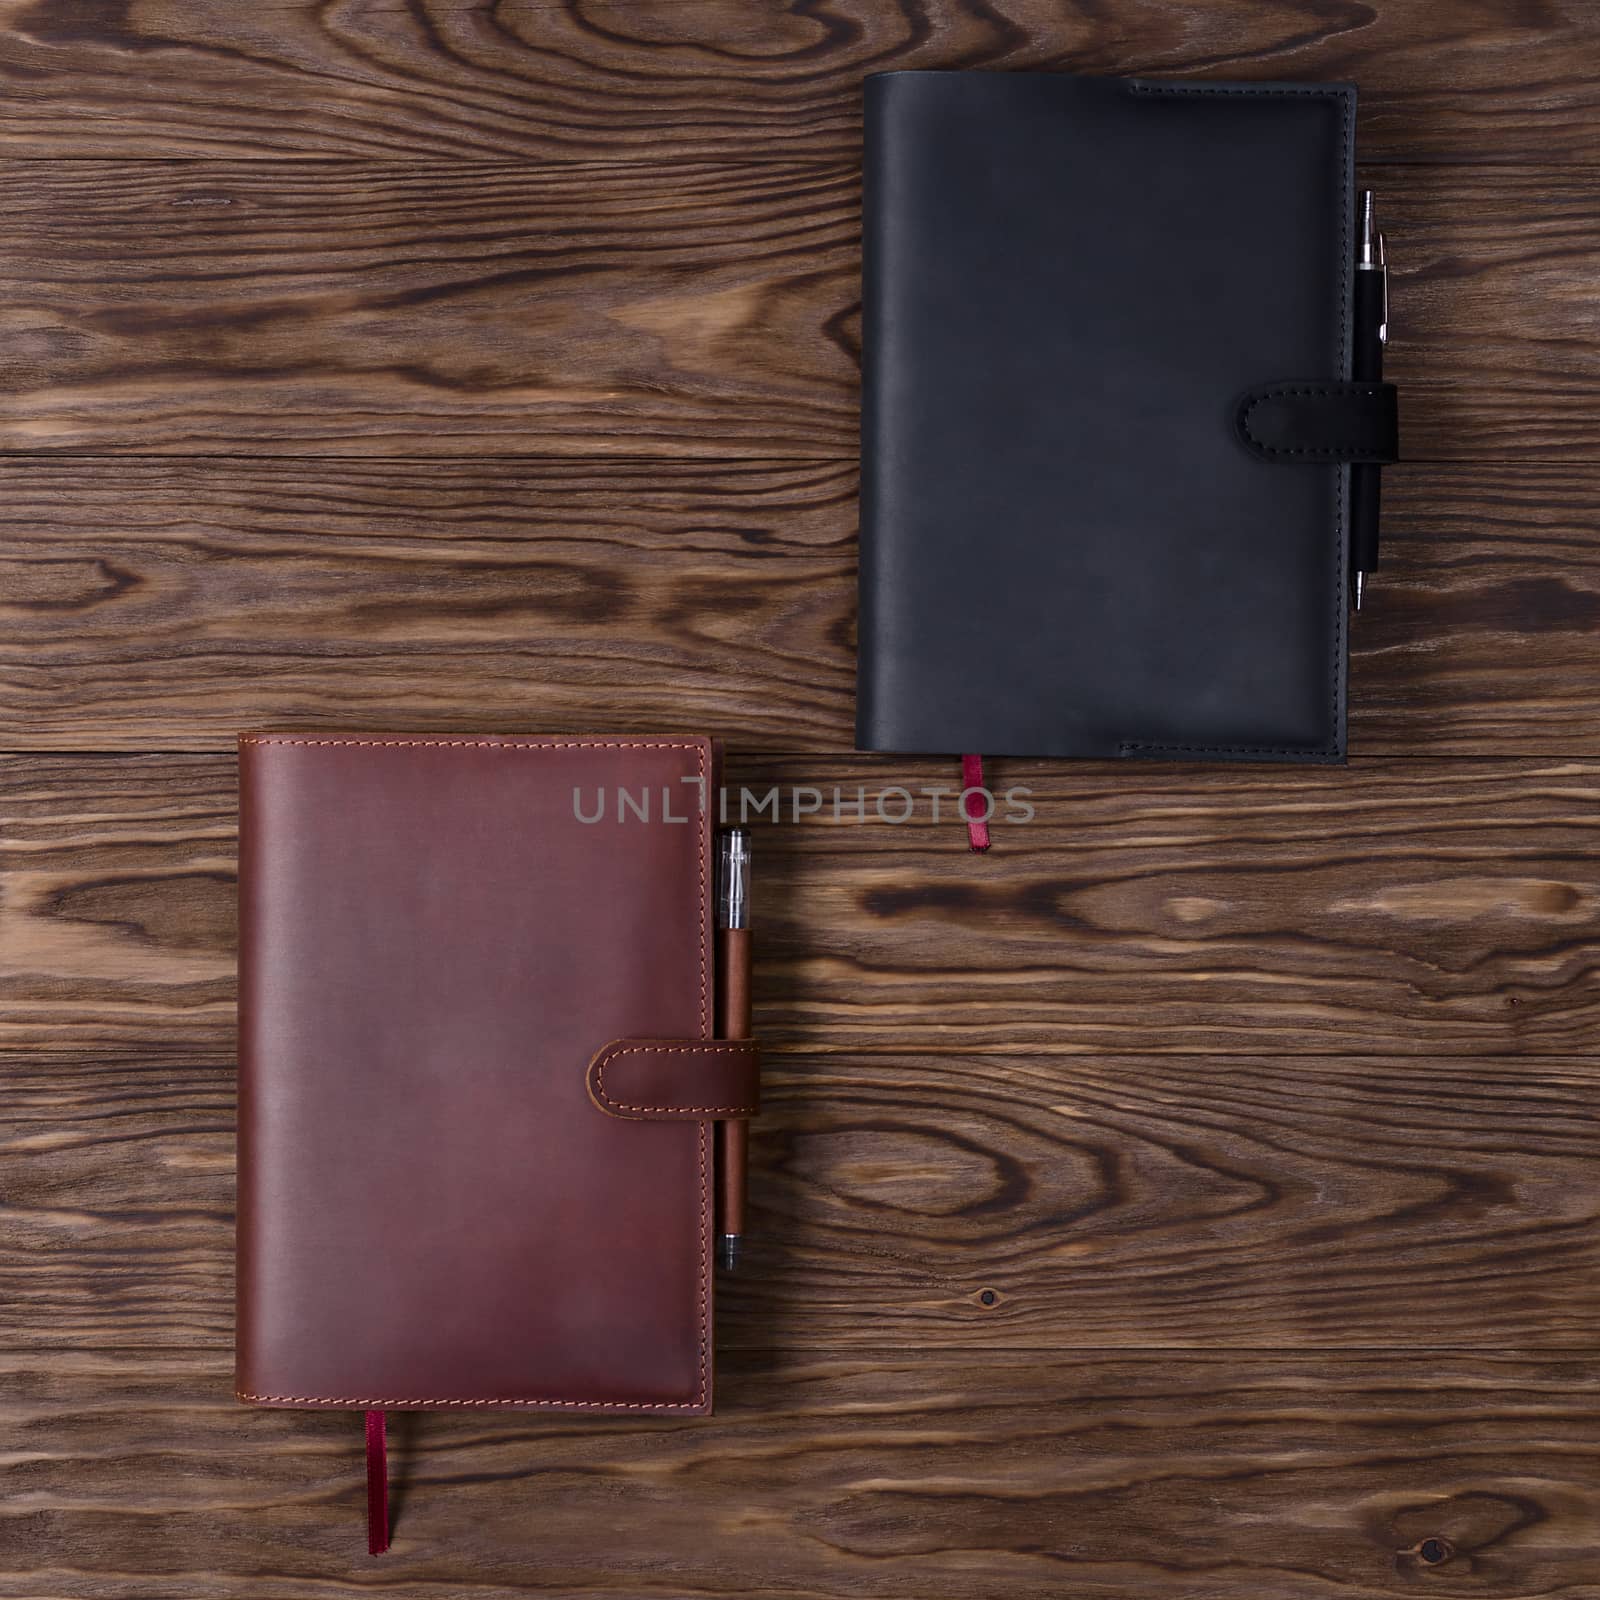 Black and brown handmade leather notebook cover with notebooks and pen on wooden background. Stock photo of luxury business accessories. Up to down view. by alexsdriver